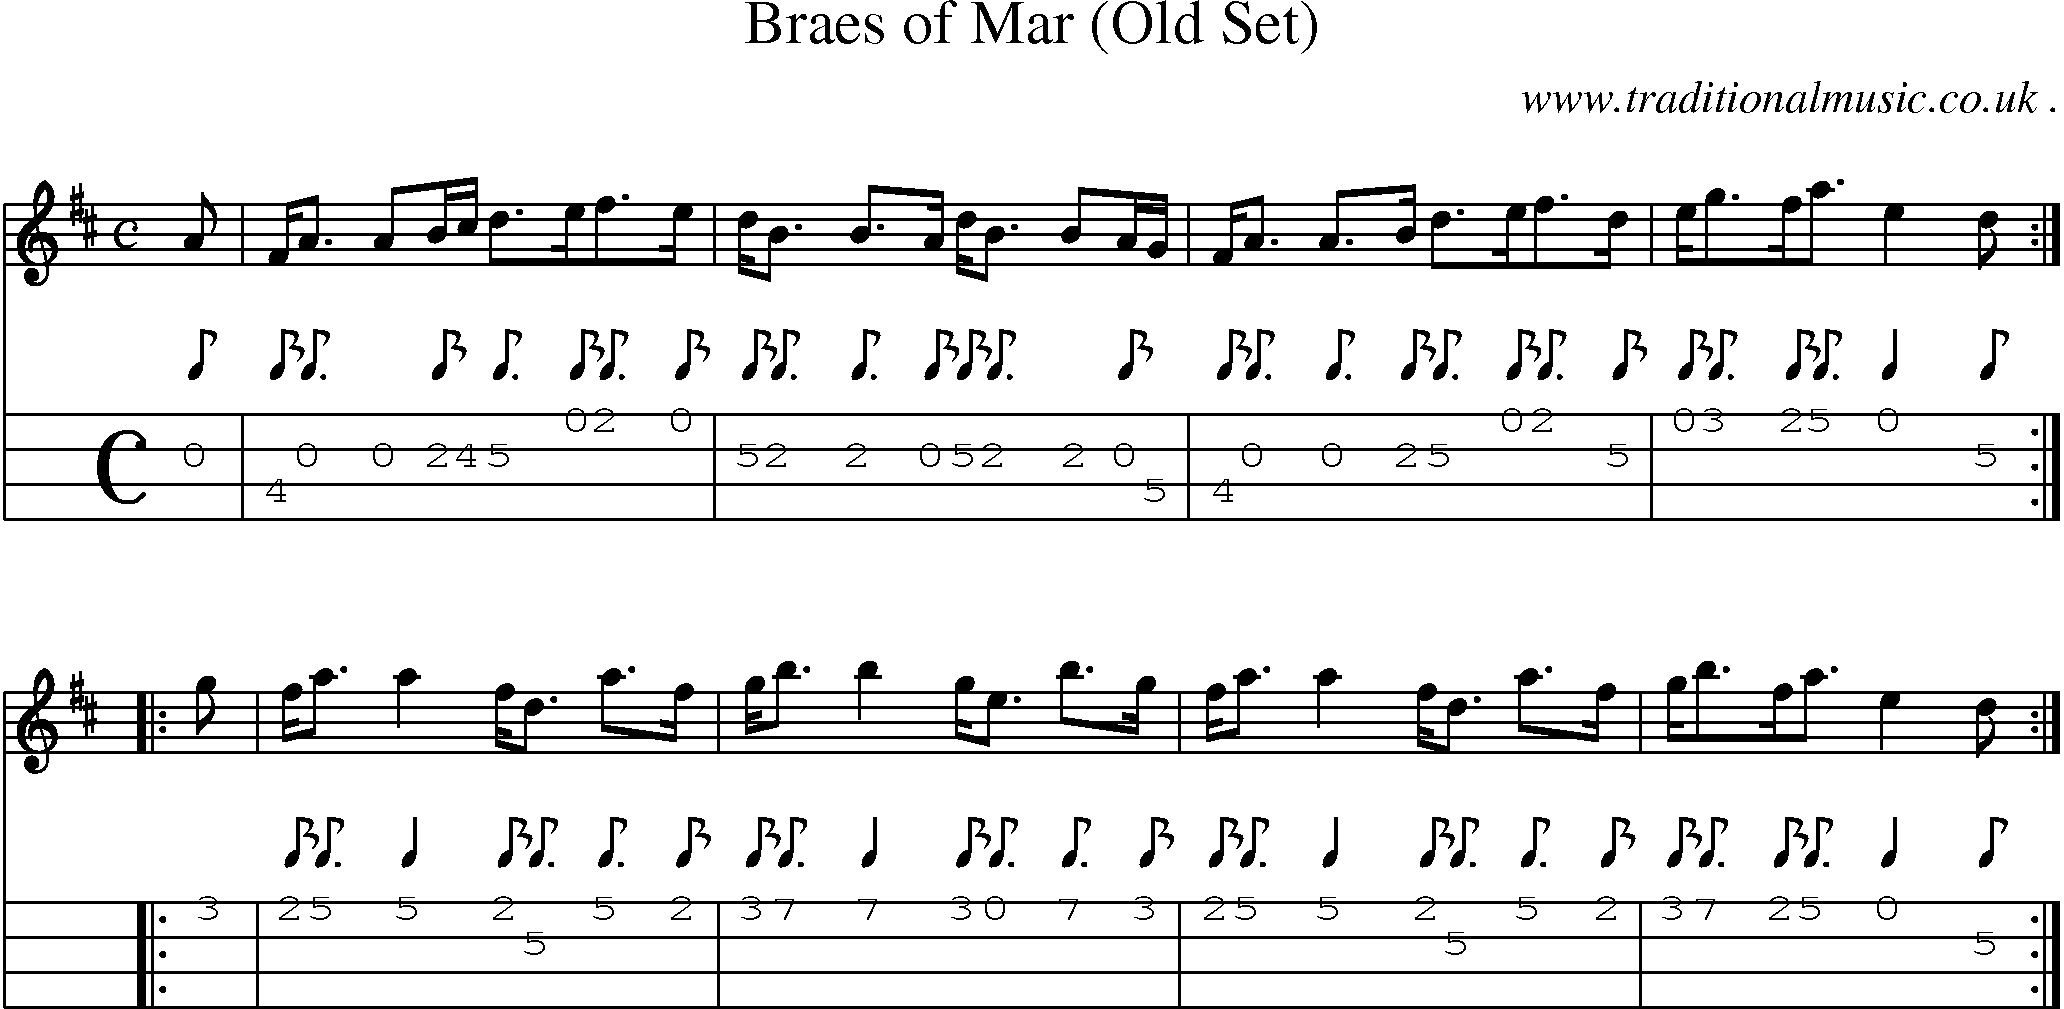 Sheet-music  score, Chords and Mandolin Tabs for Braes Of Mar Old Set